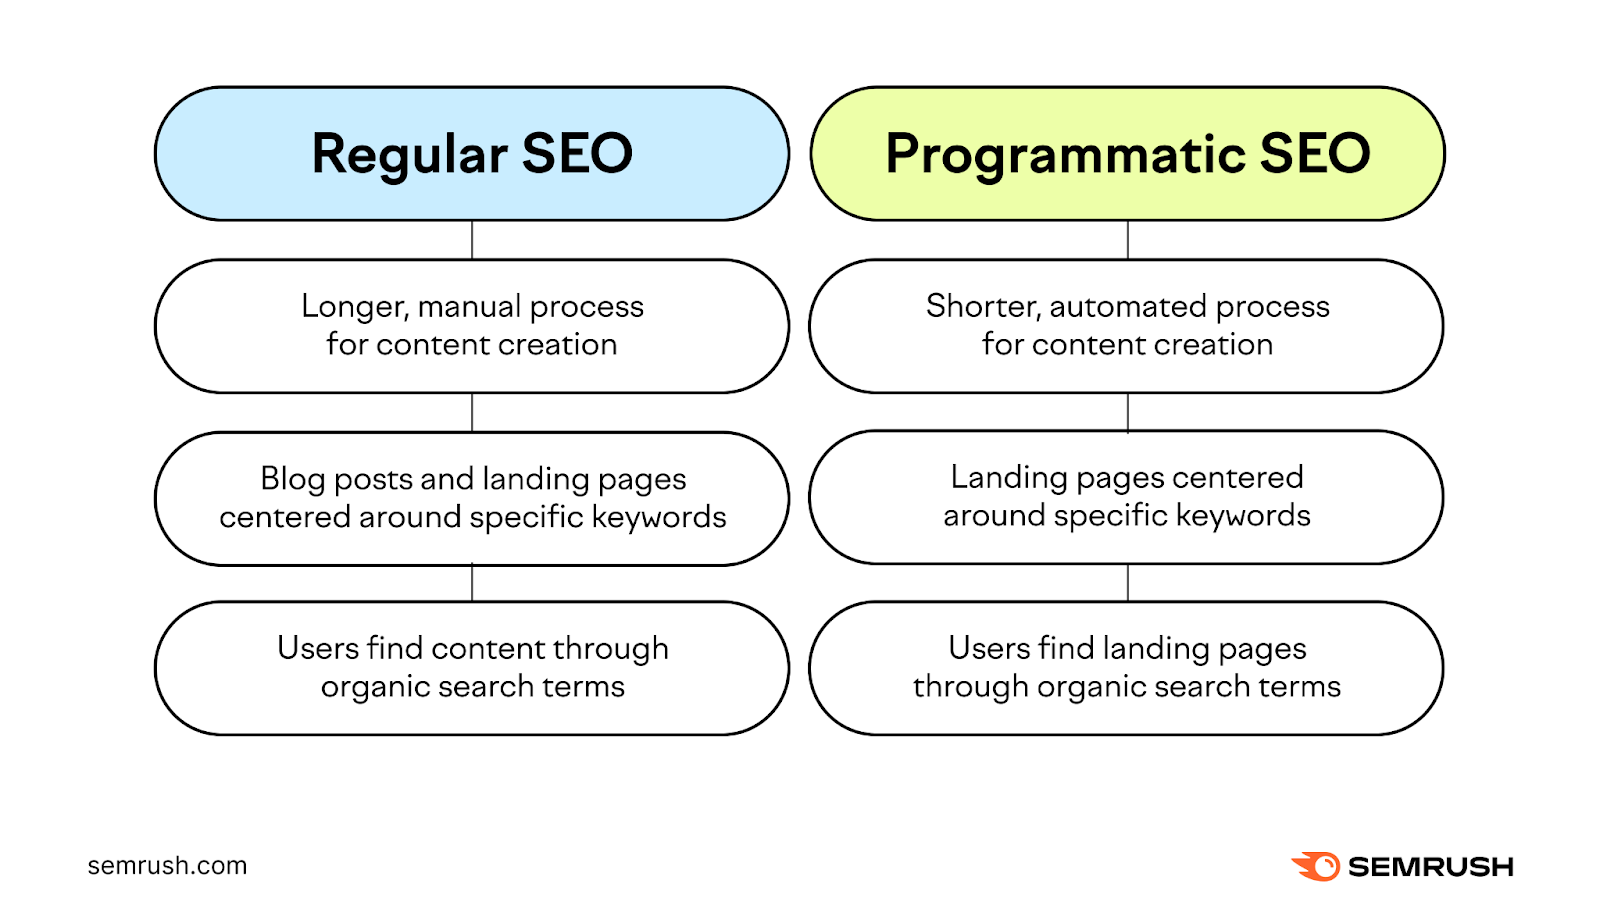 An image comparing regular and programmatic SEO